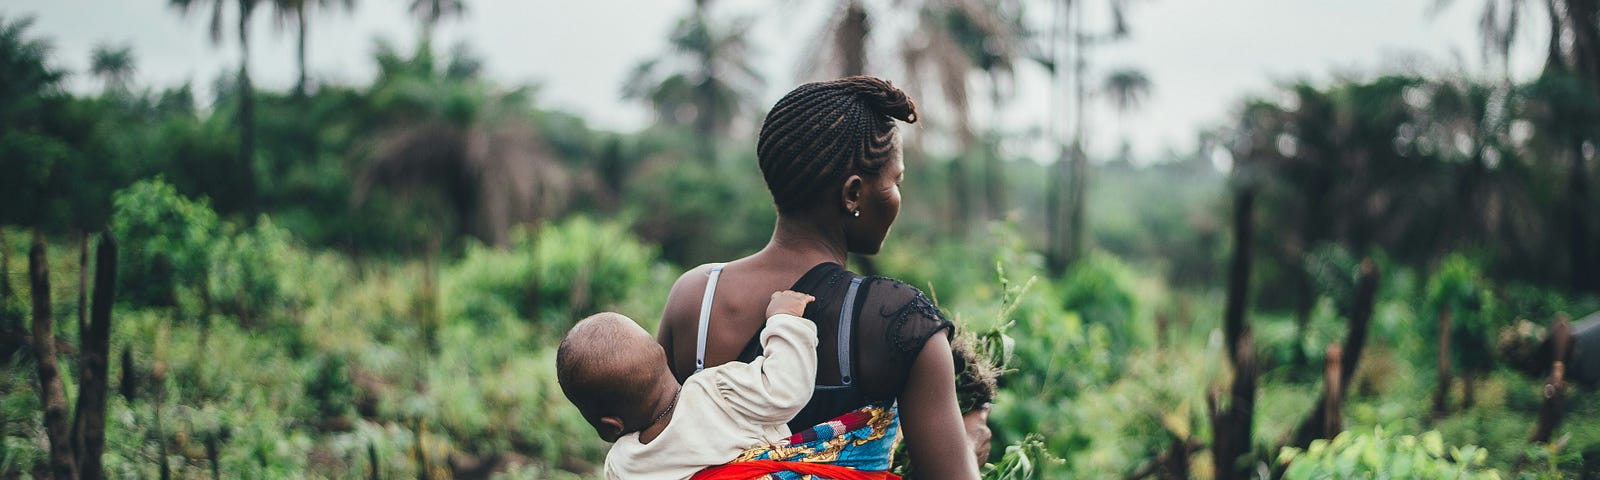 colorful image of a mother who is carrying her baby, strapped on her back.